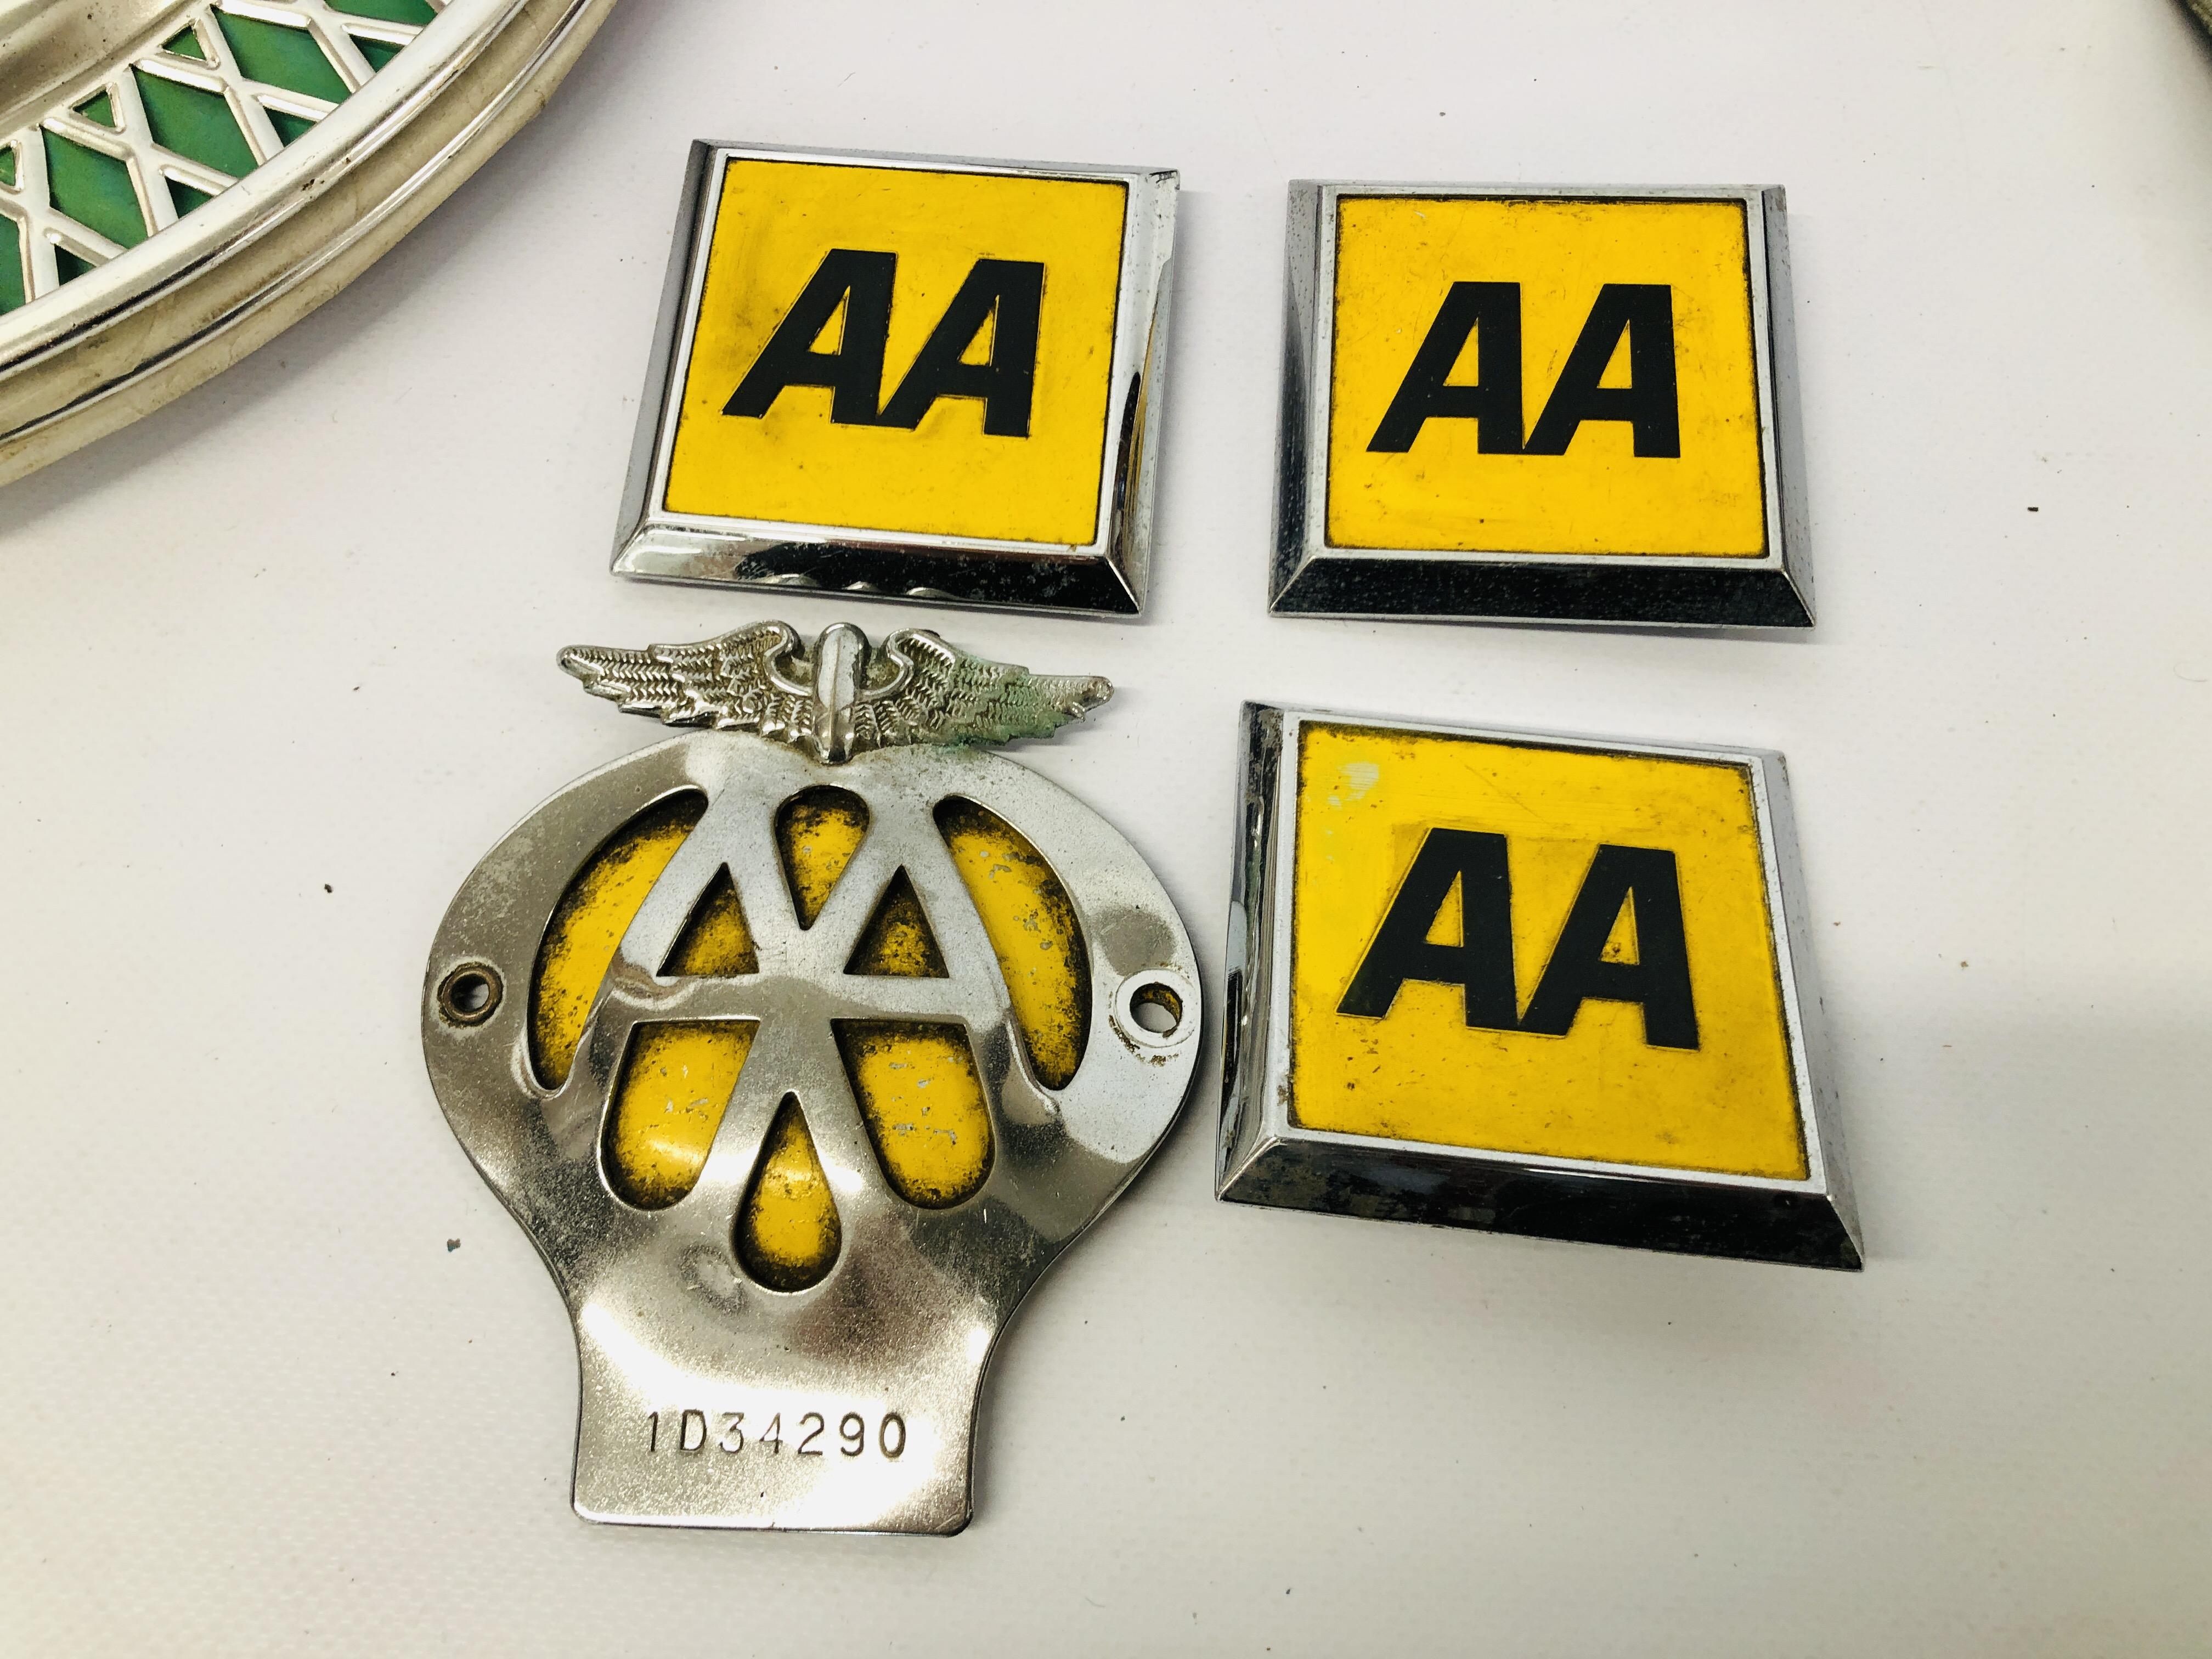 VARIOUS VINTAGE CAR BADGES AND 2 WHEEL COVERS TO INCLUDE AA, VOLKSWAGEN, KANGAROO, EAGLE ETC. - Image 8 of 10